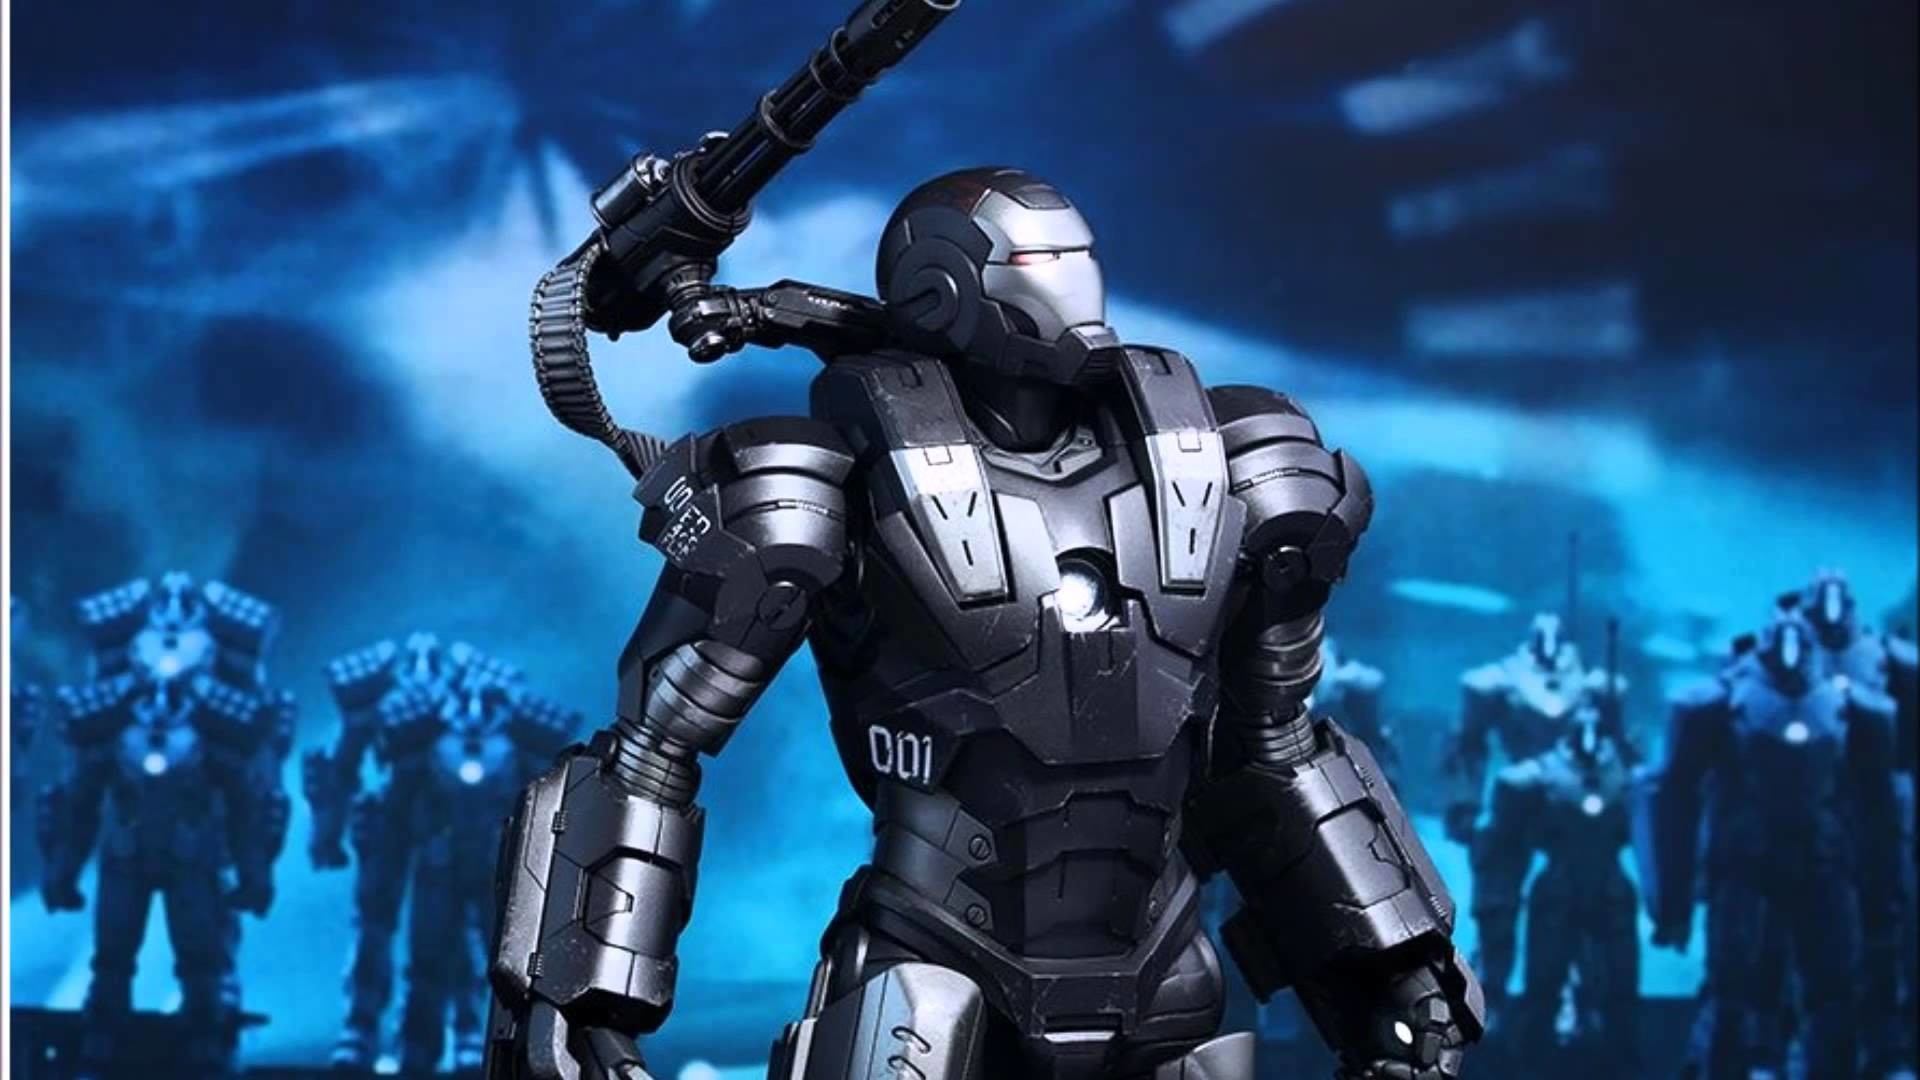 Preview Hot Toys Iron Man 2 War Machine Mk 1 Diecast 1 / 6th Collectible Figure Preview MMS 331 D13 – YouTube